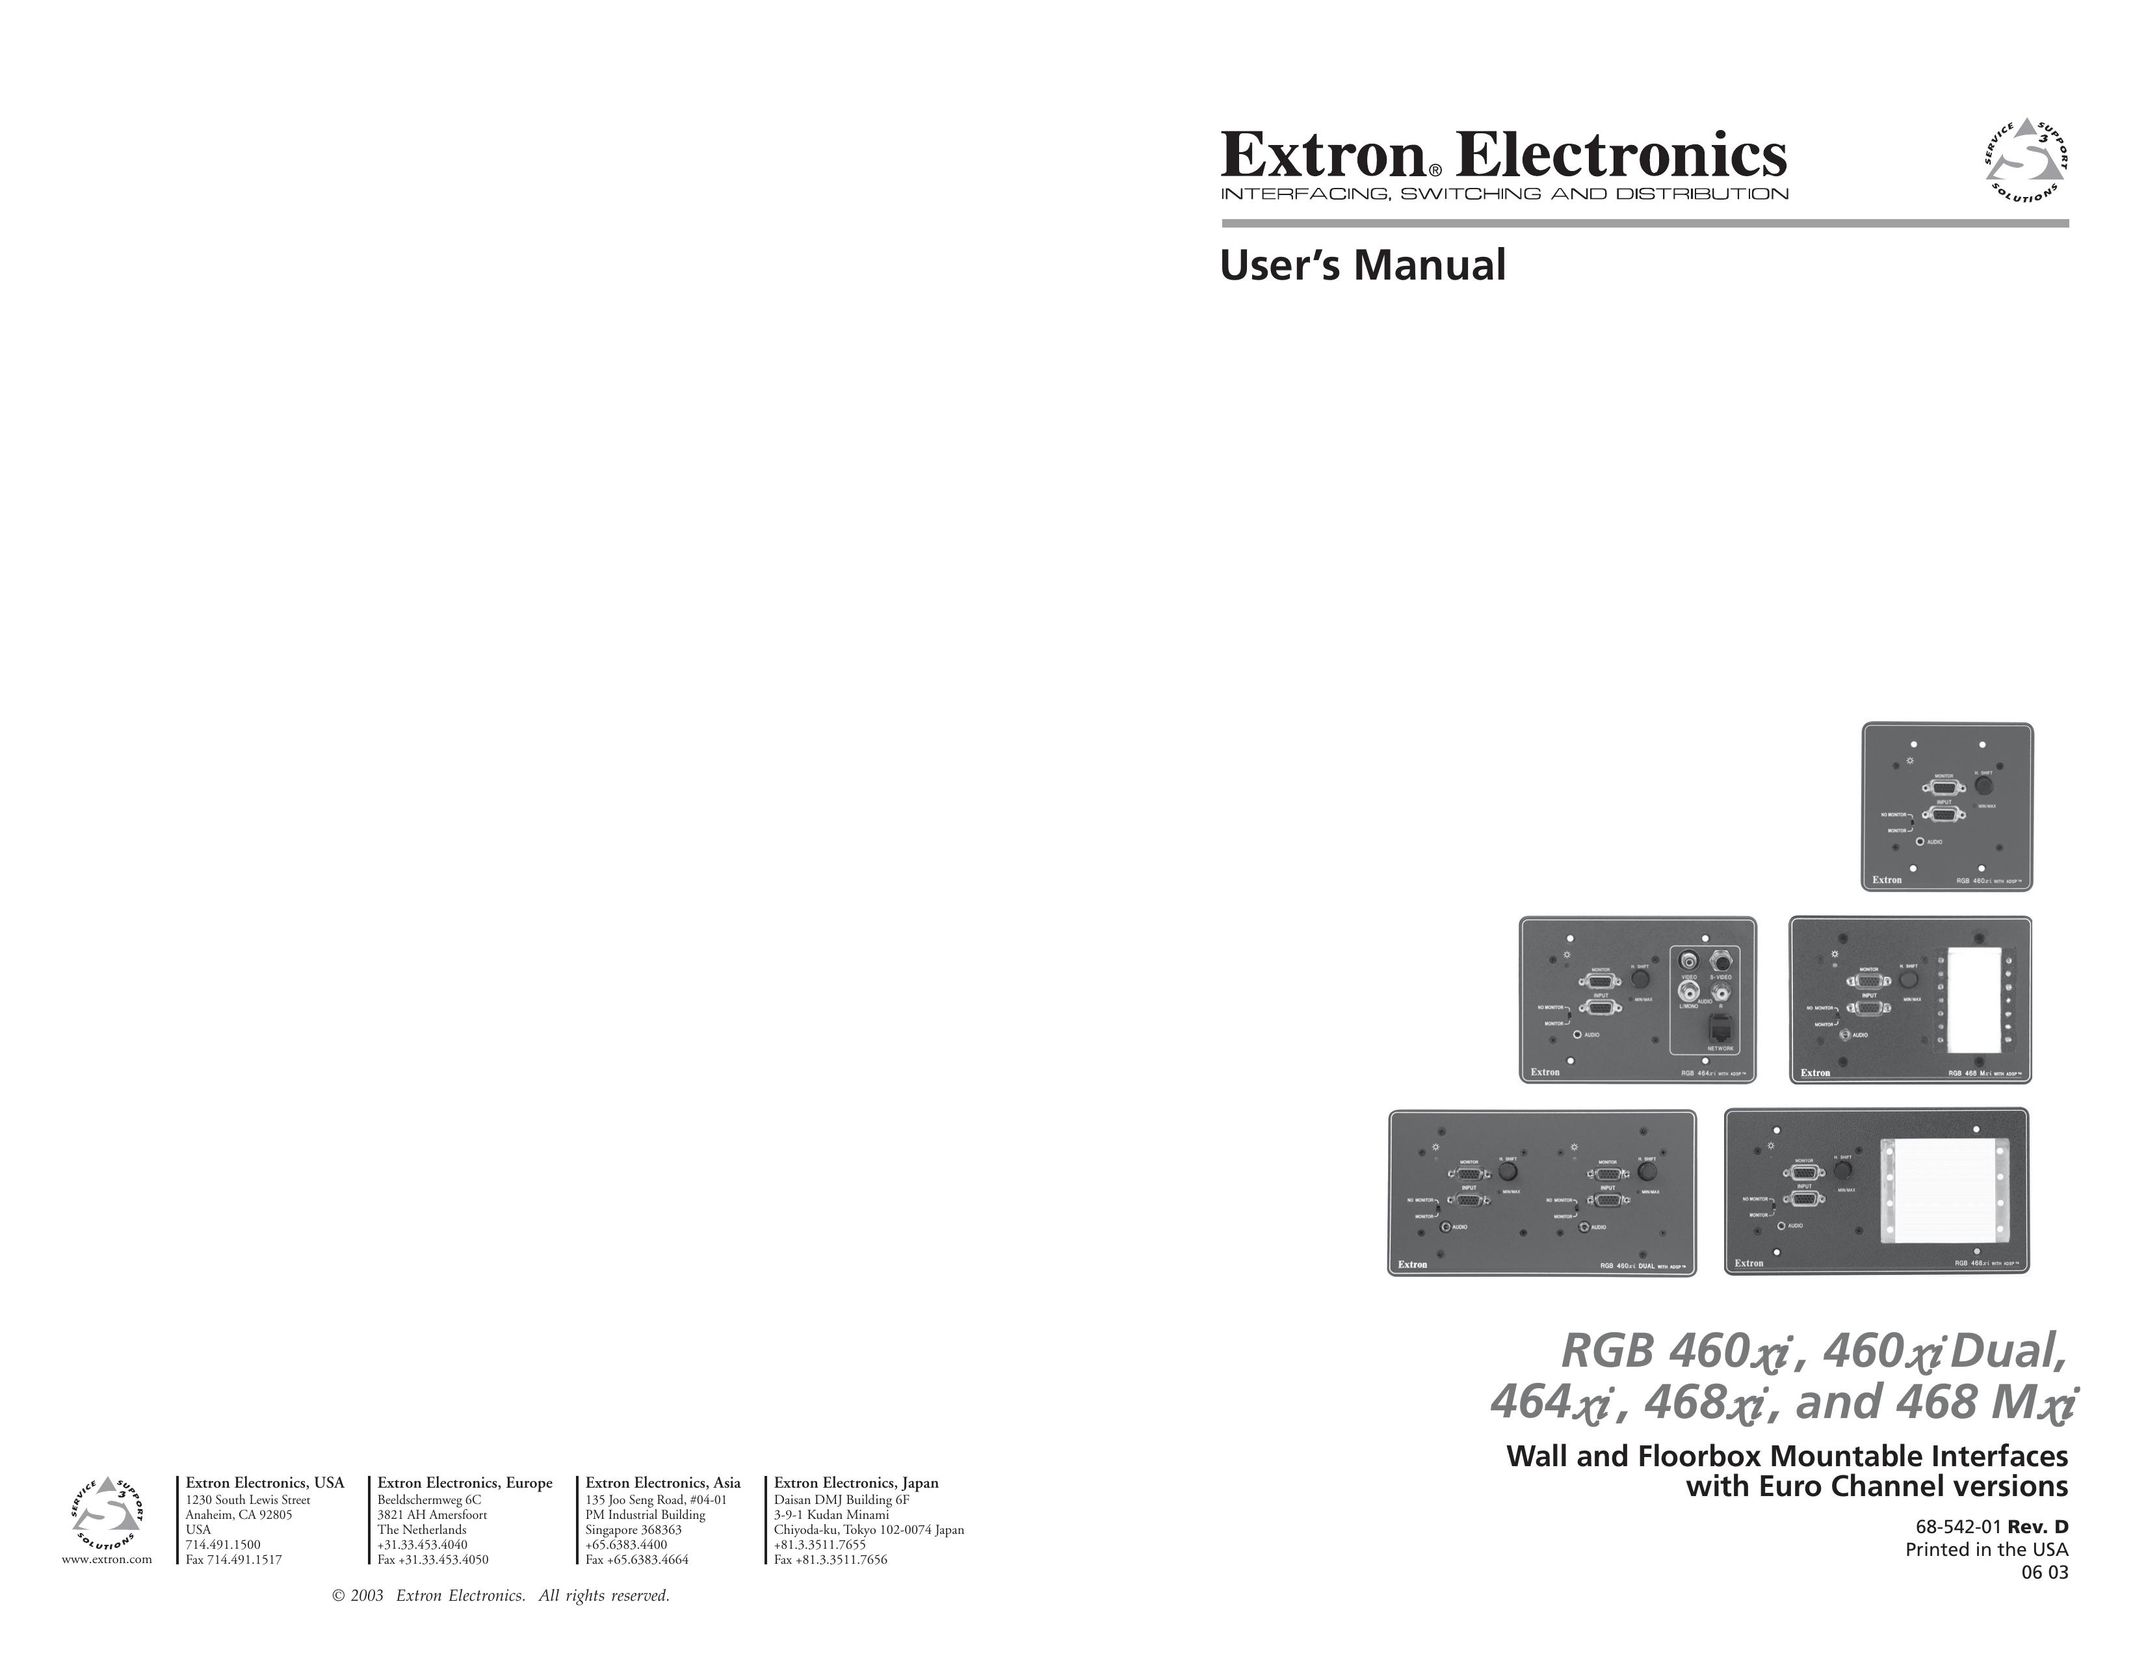 Extron electronic 468xi TV Cables User Manual